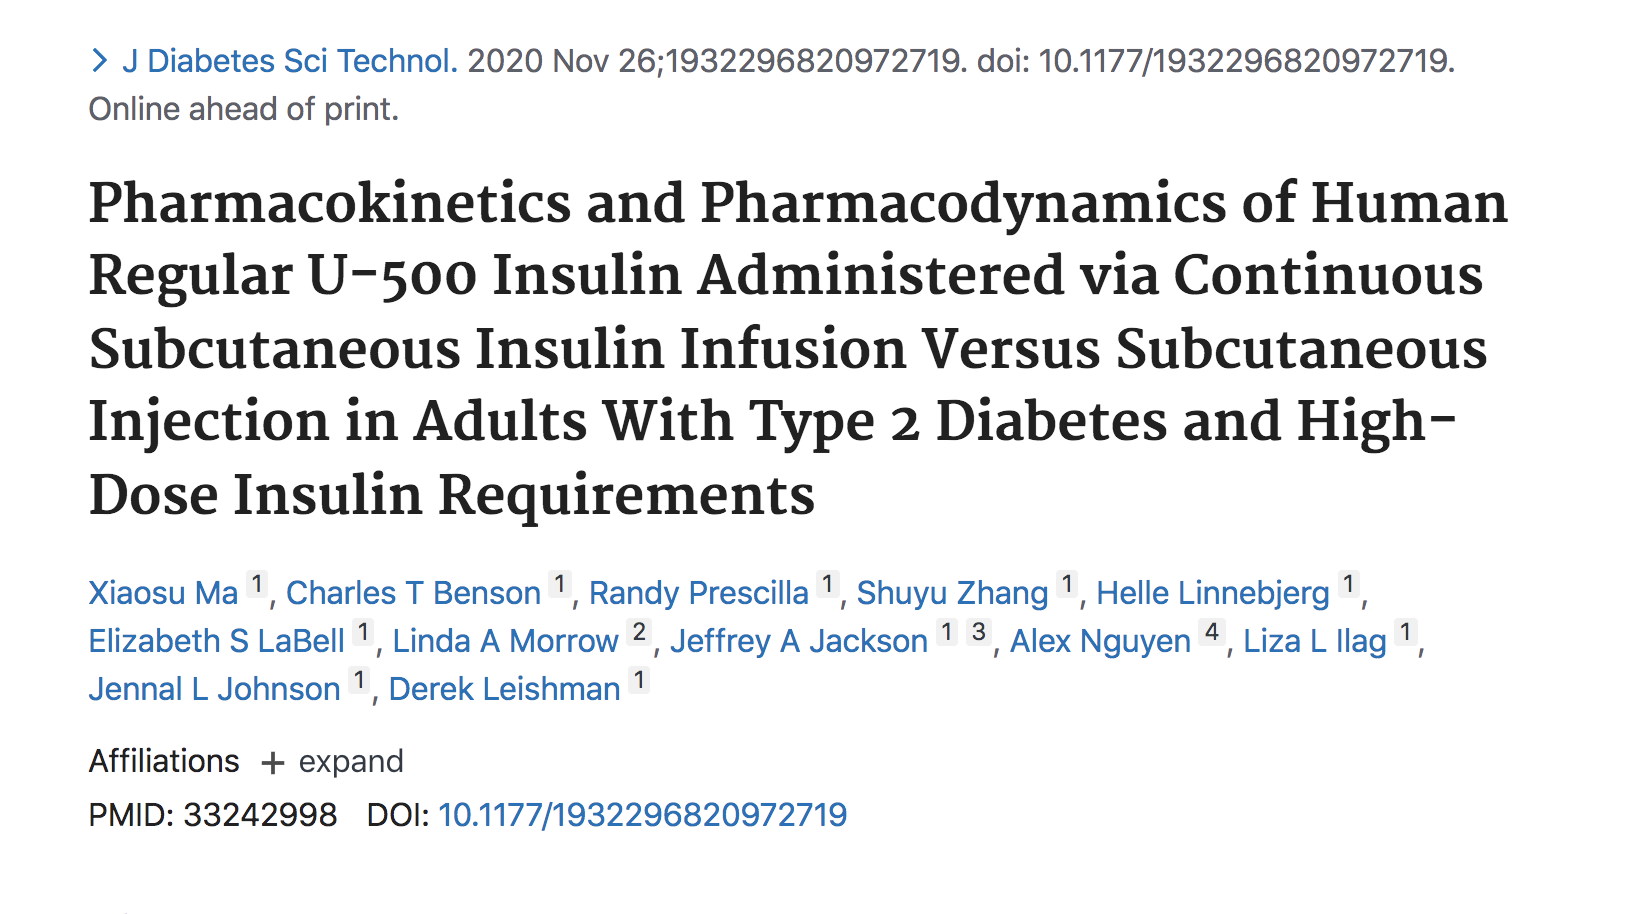 Pharmacokinetics and Pharmacodynamics of Human Regular U-500 Insulin (U-500R) Administered via Continuous Subcutaneous Insulin Infusion (CSII) vs. Subcutaneous Injection (SCI) in Adults with Type 2 Diabetes and High Insulin Requirements thumbnail